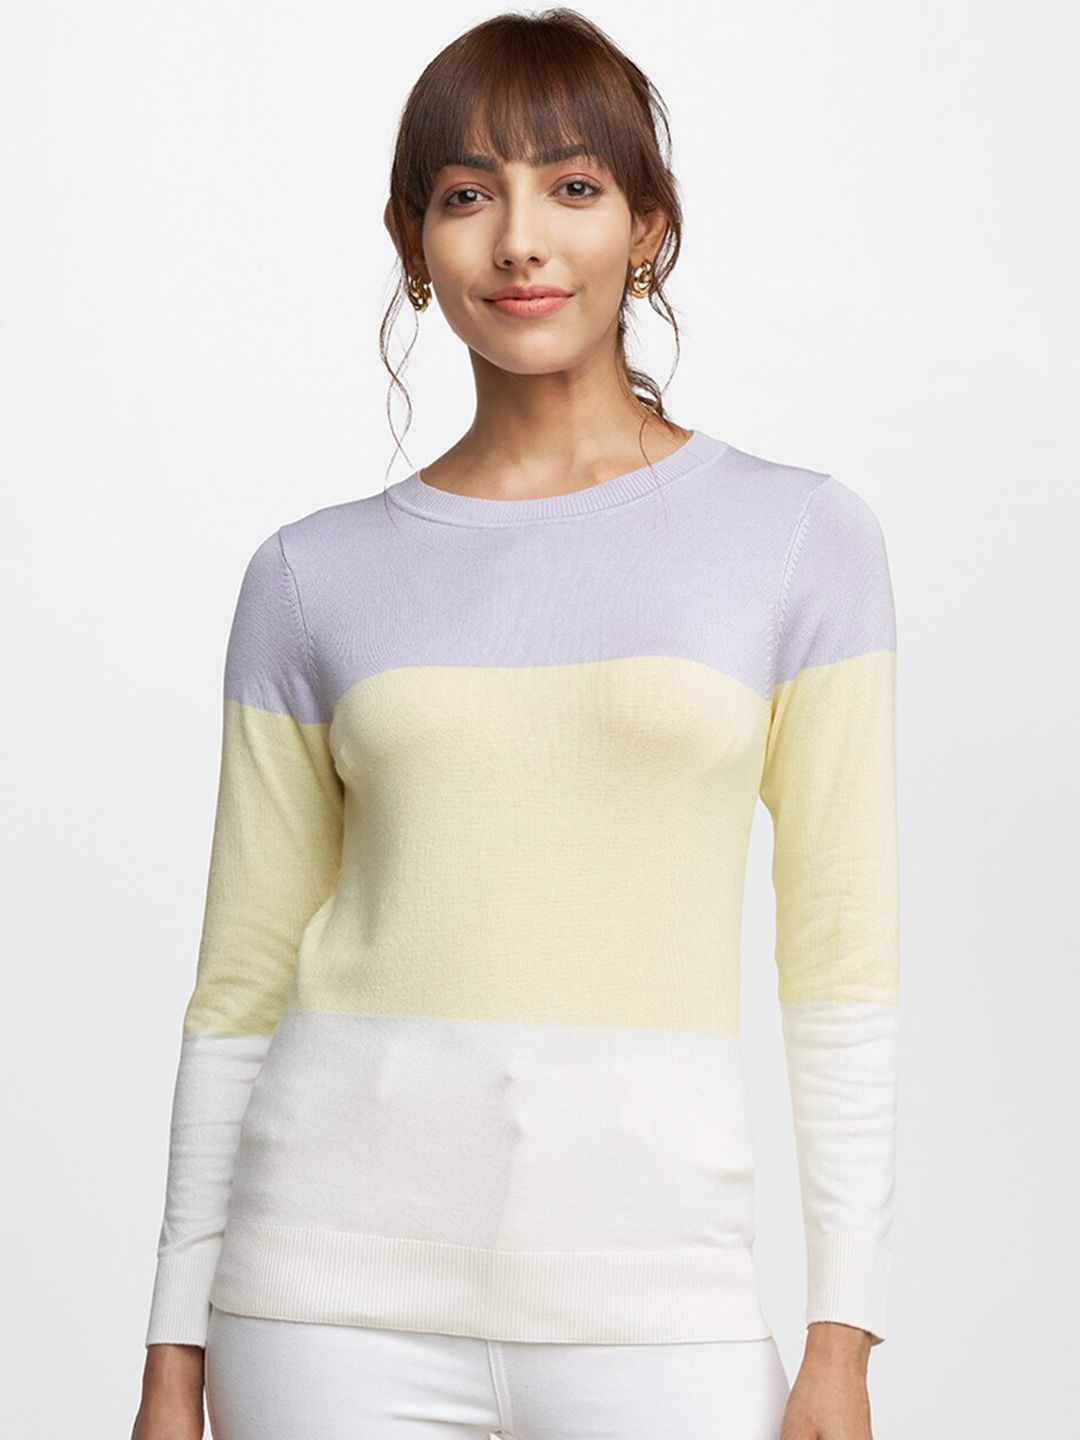 AND Lavender & Yellow Colourblocked Top Price in India